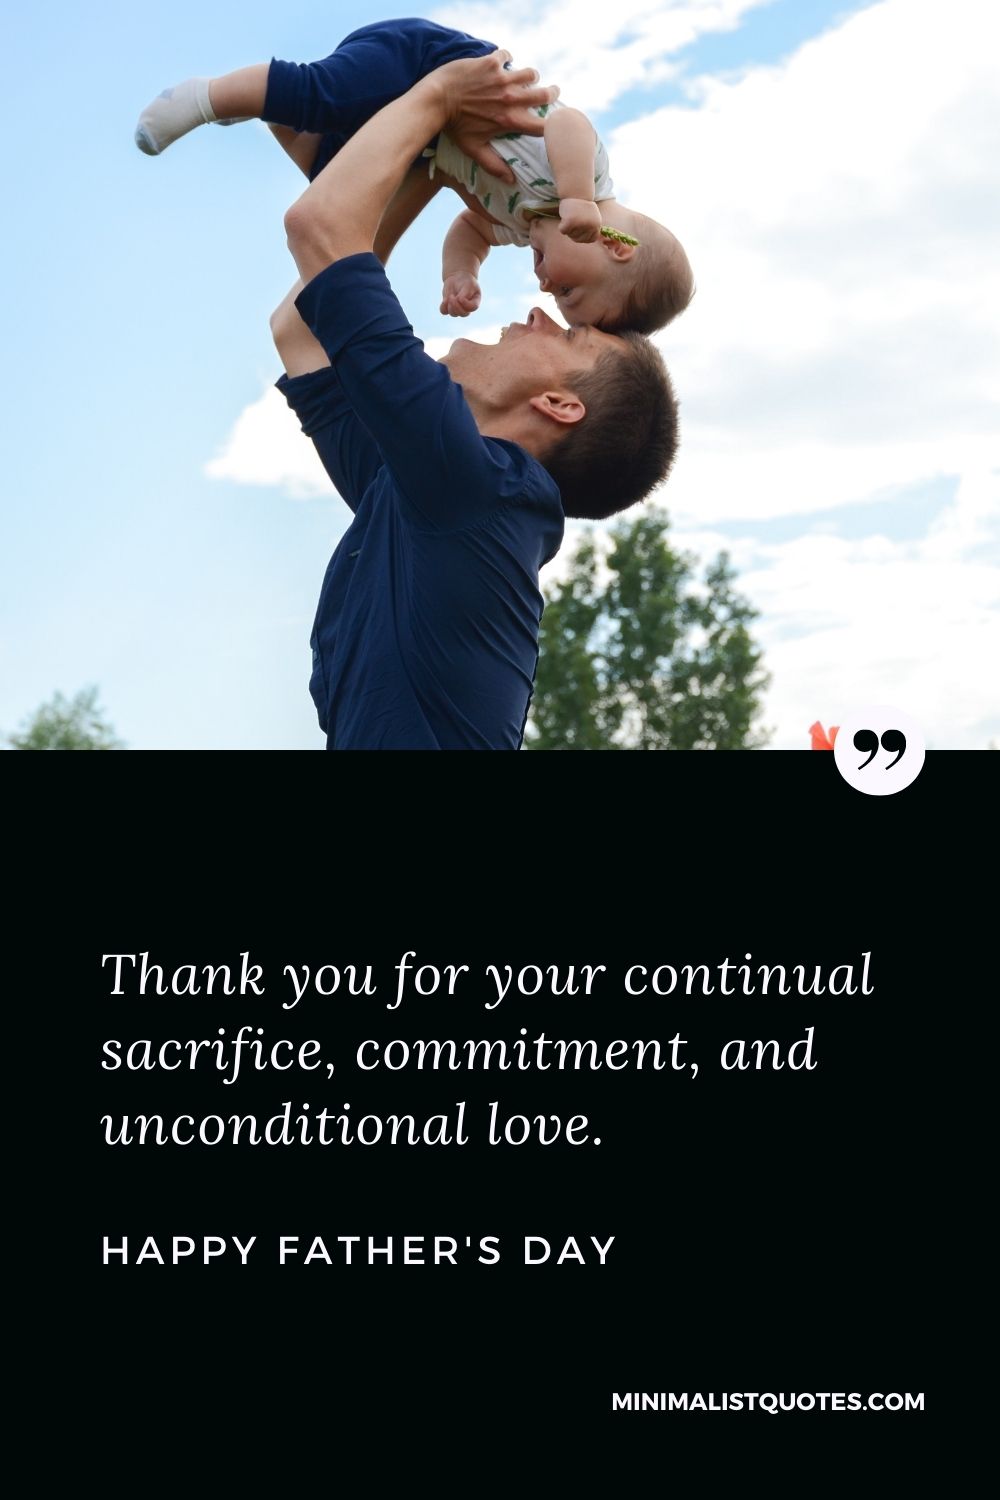 Father's Day wish, message & quote with HD image: Thank you for your continual sacrifice, commitment, and unconditional love. Happy Father's Day!